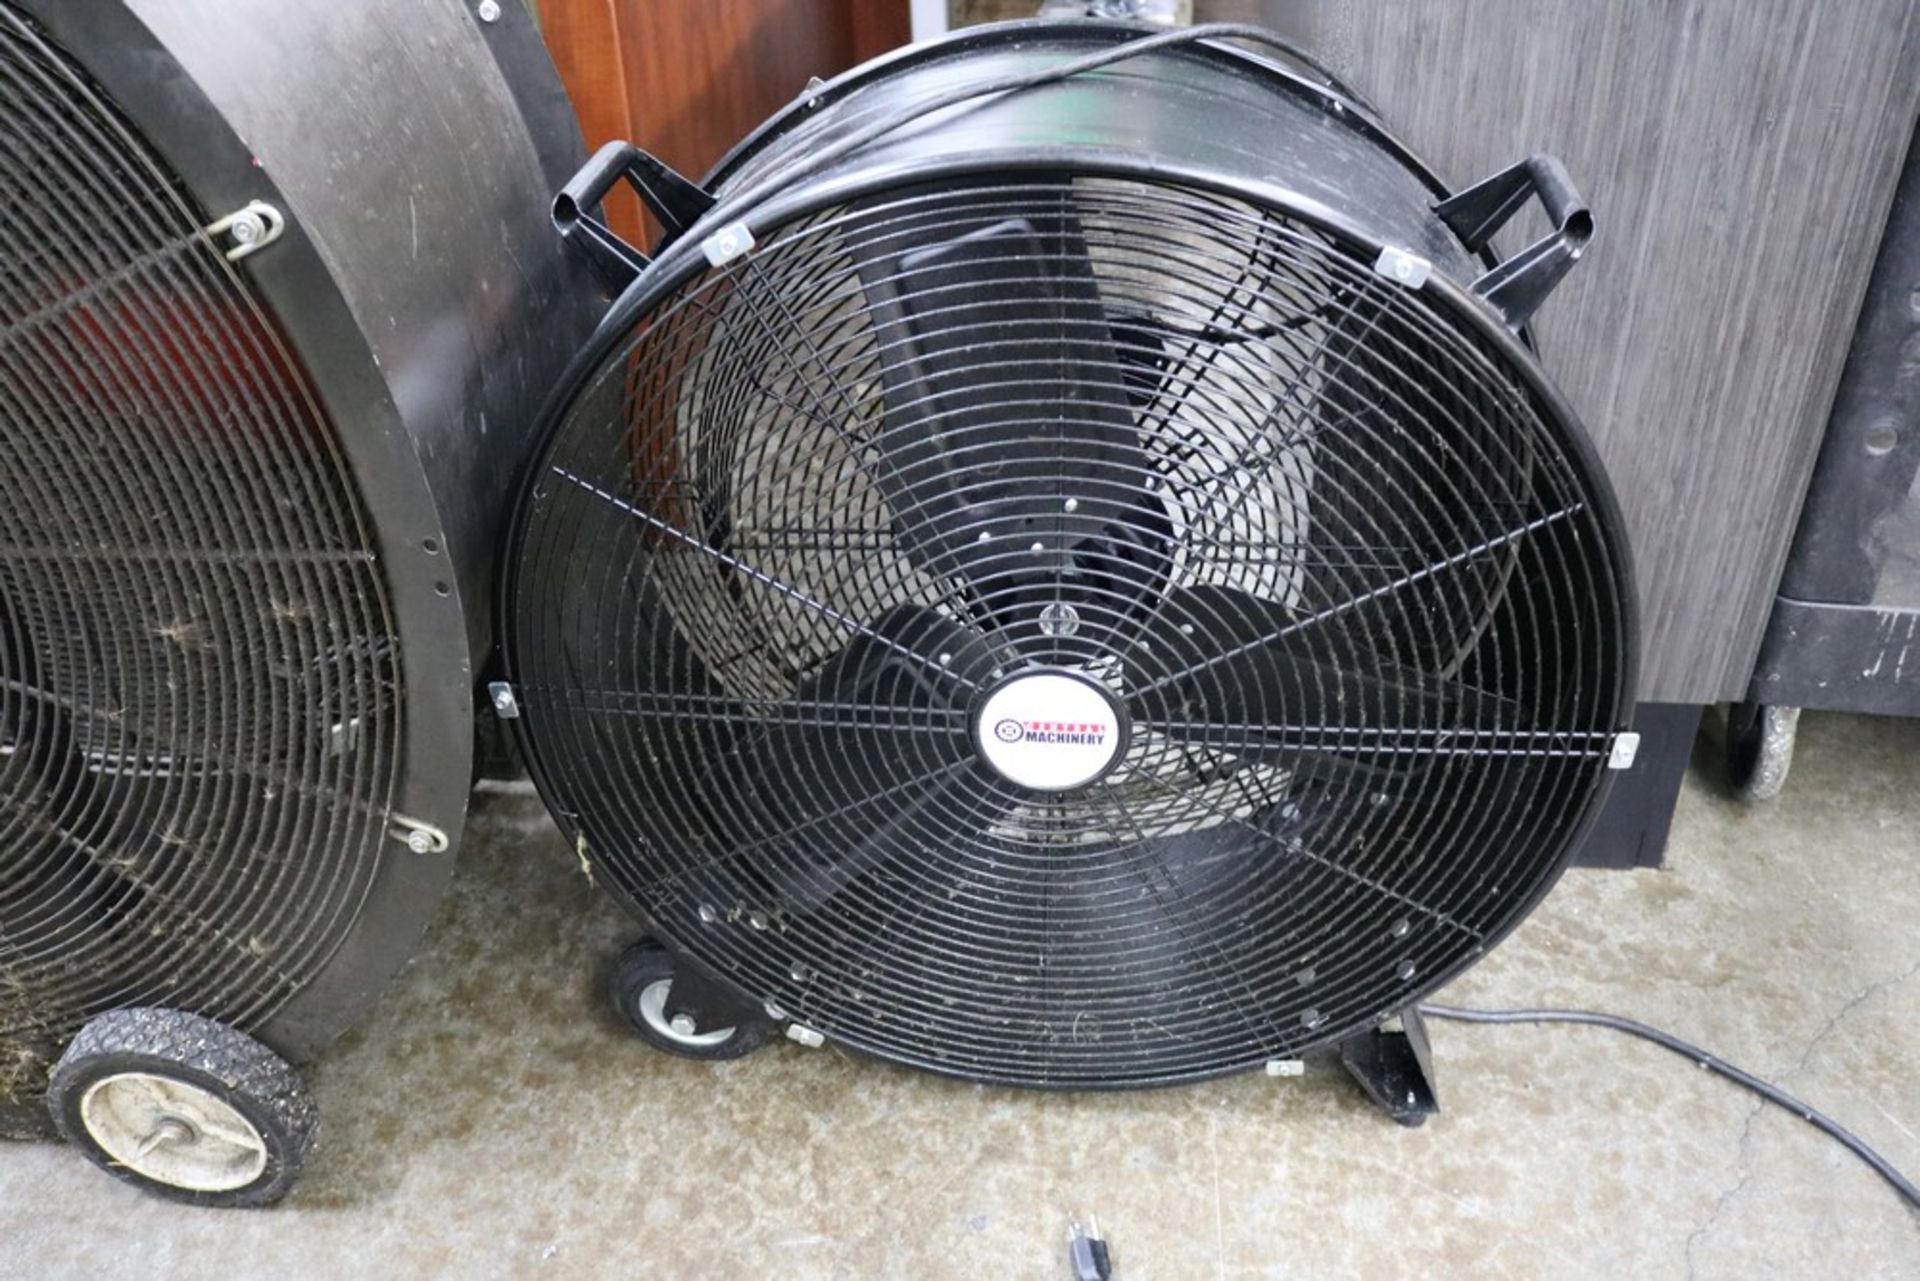 Dayton 38" Shop Fan and Central Machinery 24" Shop Fan - Image 3 of 3